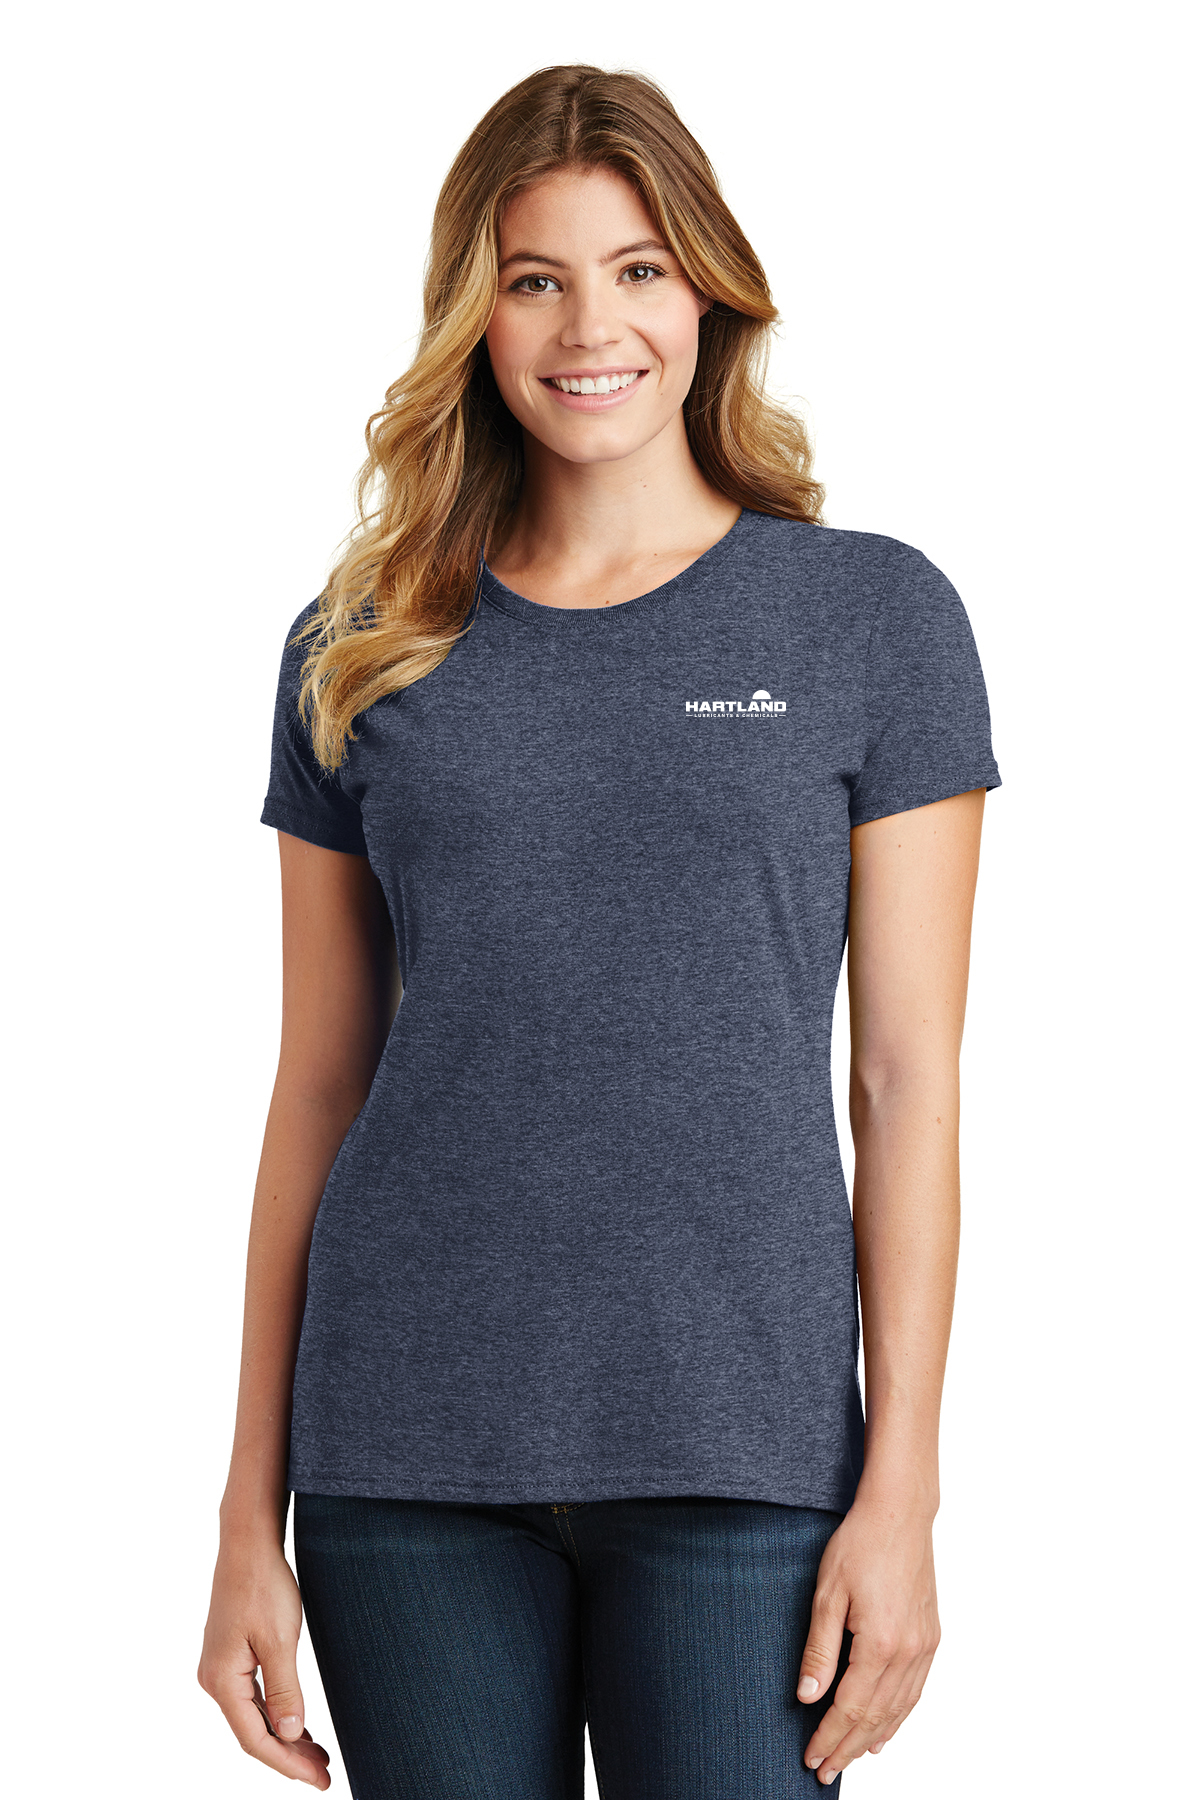 Hartland Lubricants and Chemicals Ladies T-Shirt